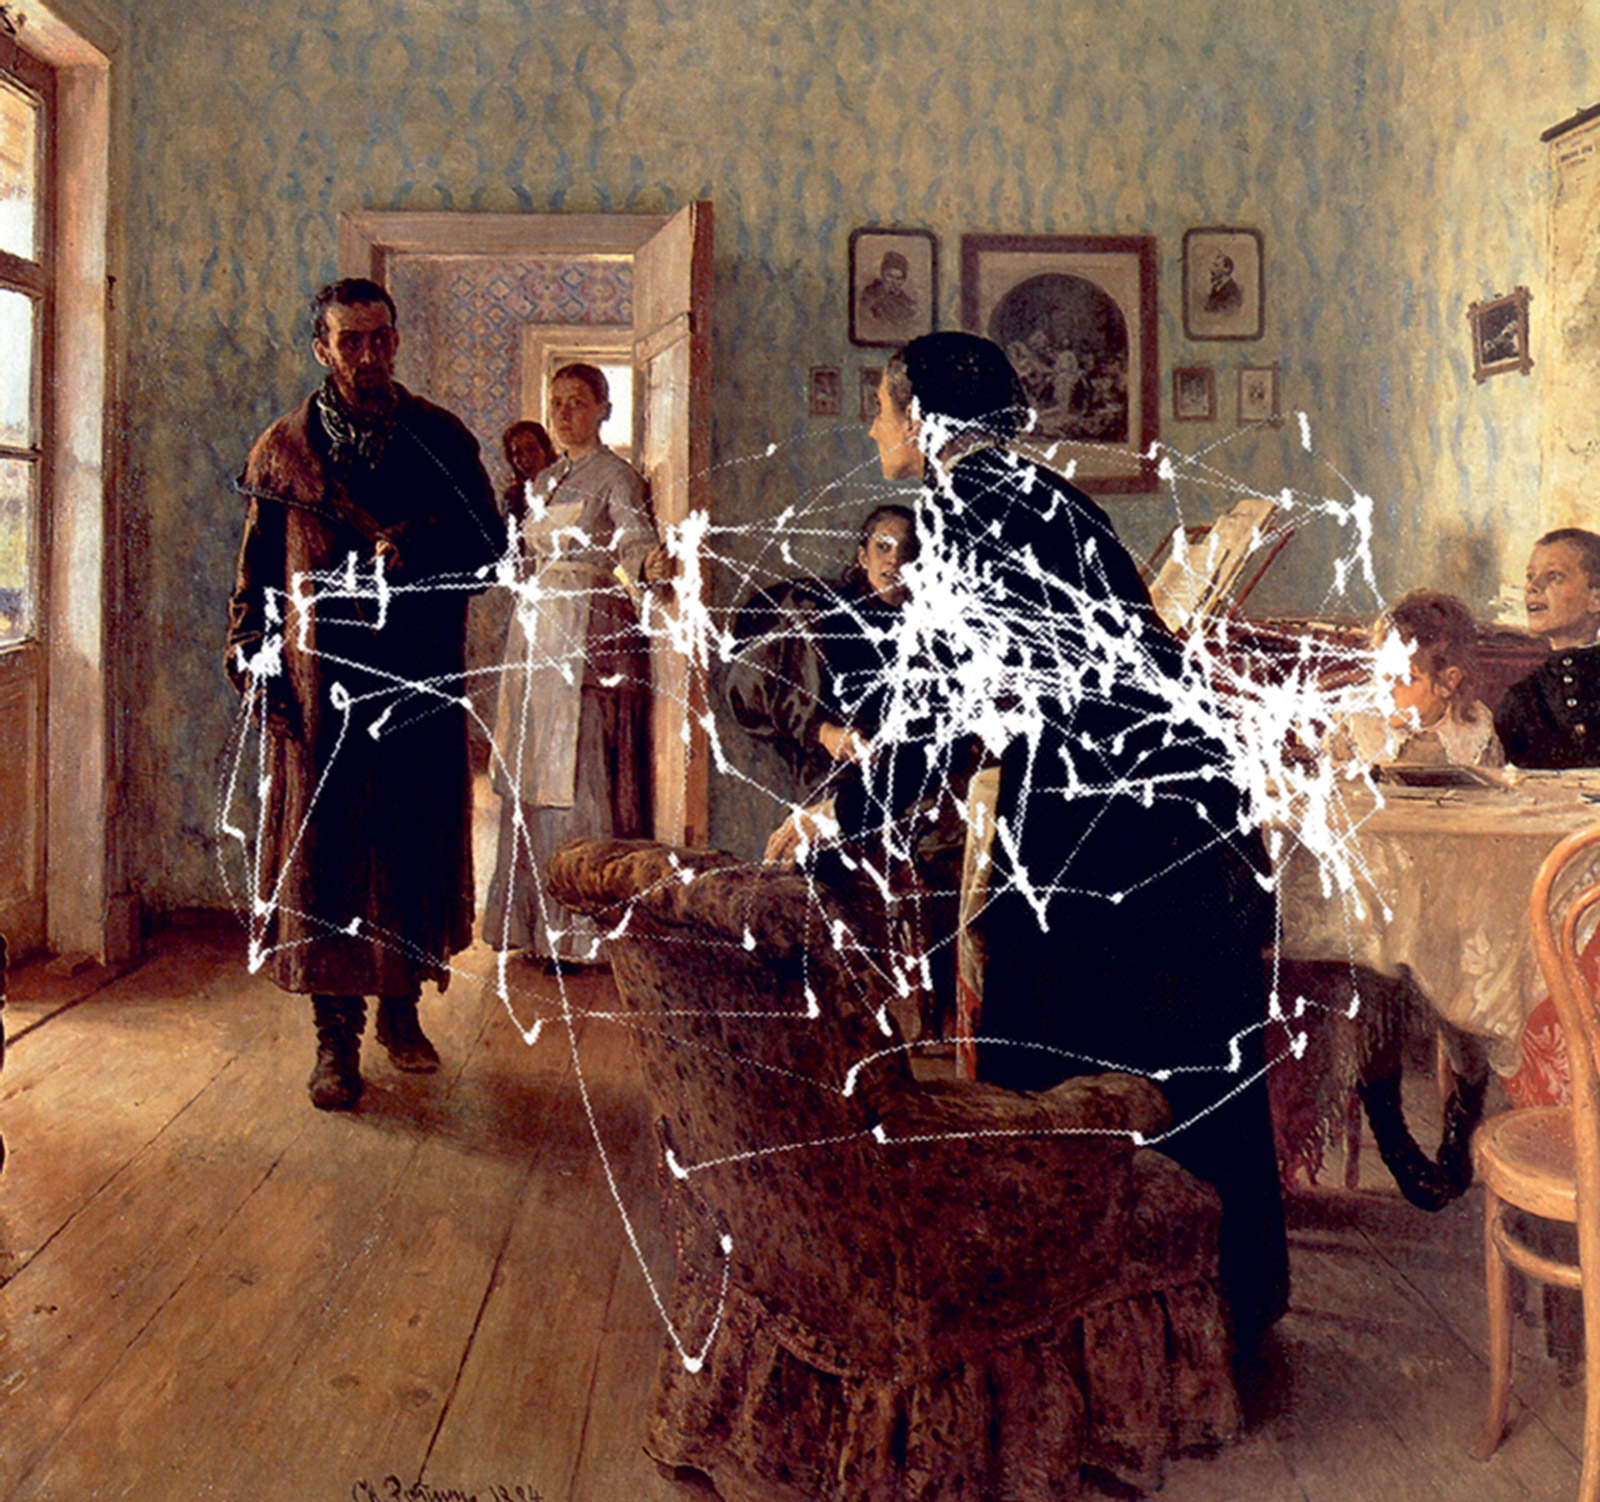 Ilya Repin’s eighteen eighty-four painting titled “An Unexpected Visitor,” marked with white lines that map the eye movements of a single subject asked by Yarbus to estimate the material circumstances of the family.